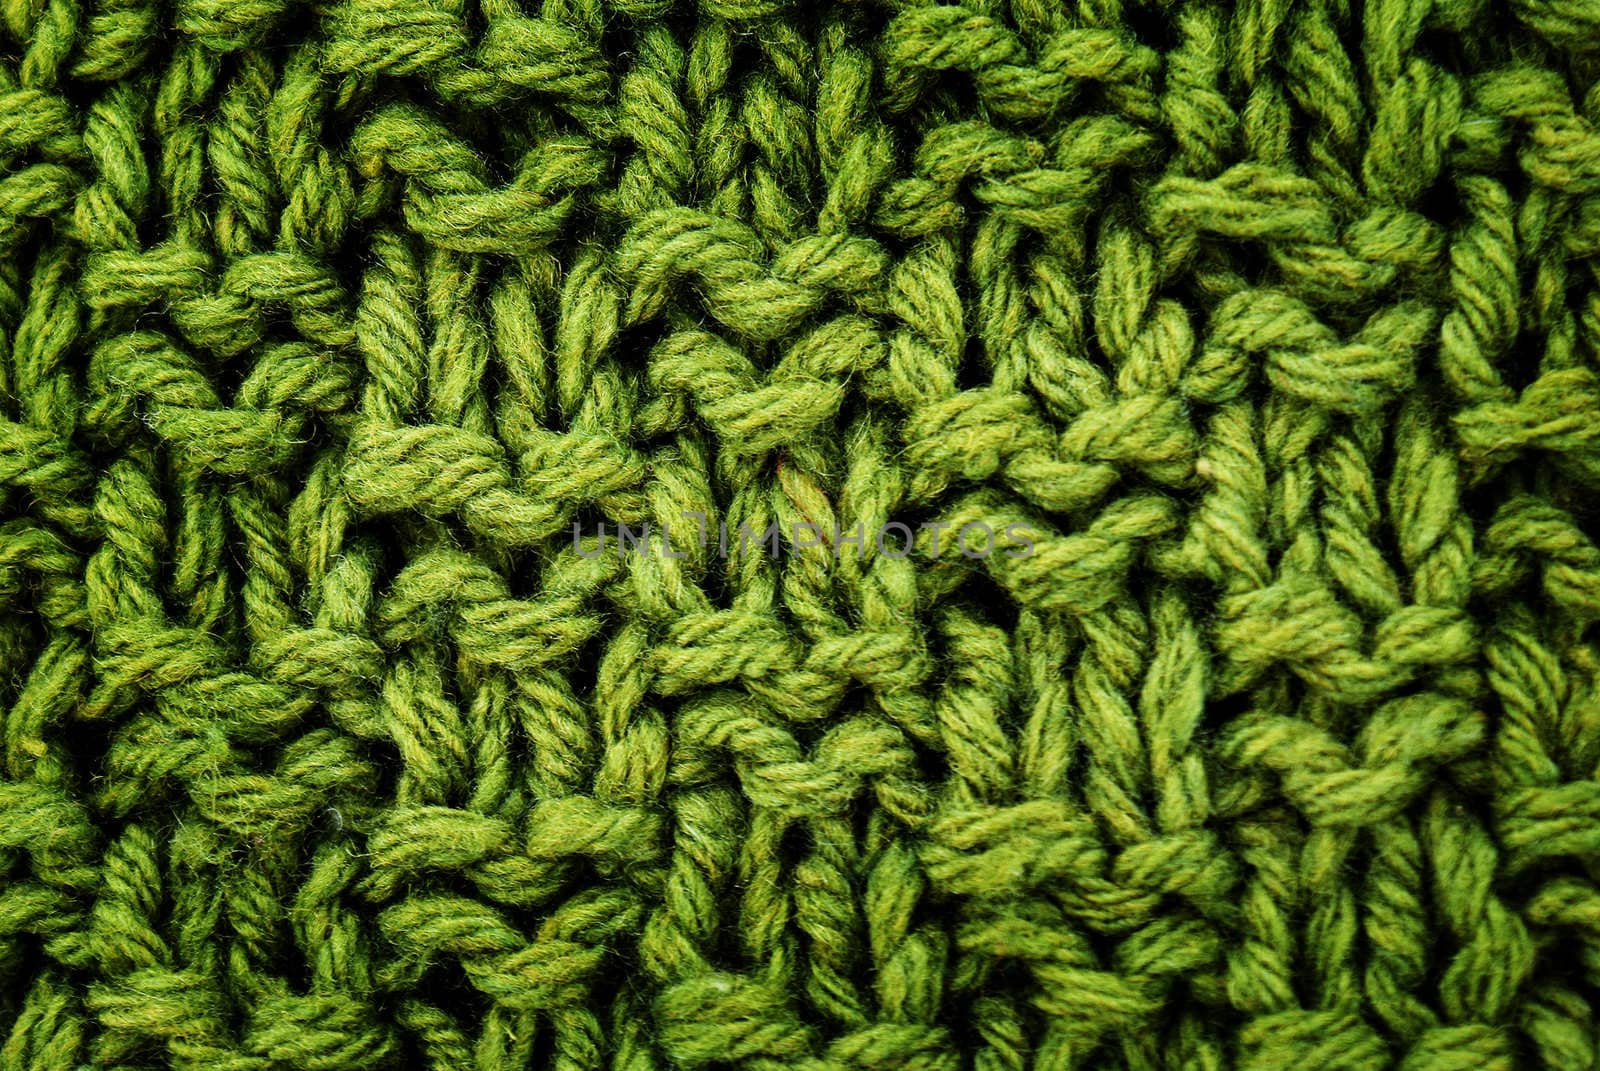 woolen texture-abstract background from sewing knitting needle  